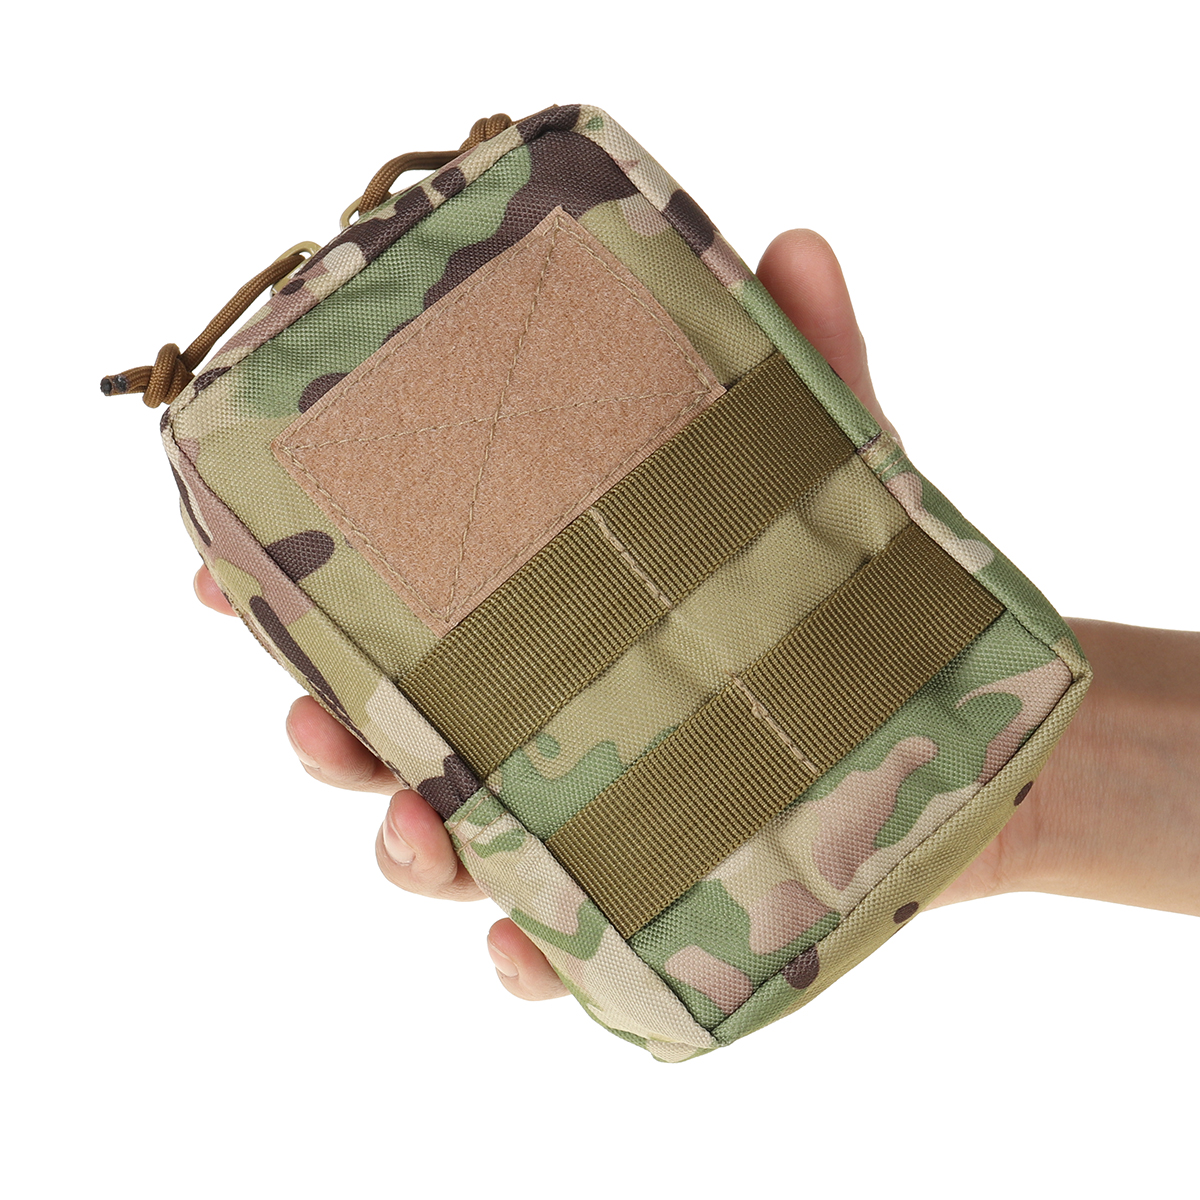 Military-Tactical-Camo-Belt-Pouch-Bag-Pack-Phone-Bags-Molle-Pouch-Camping-Waist-Pocket-Bag-Phone-Cas-1777605-9